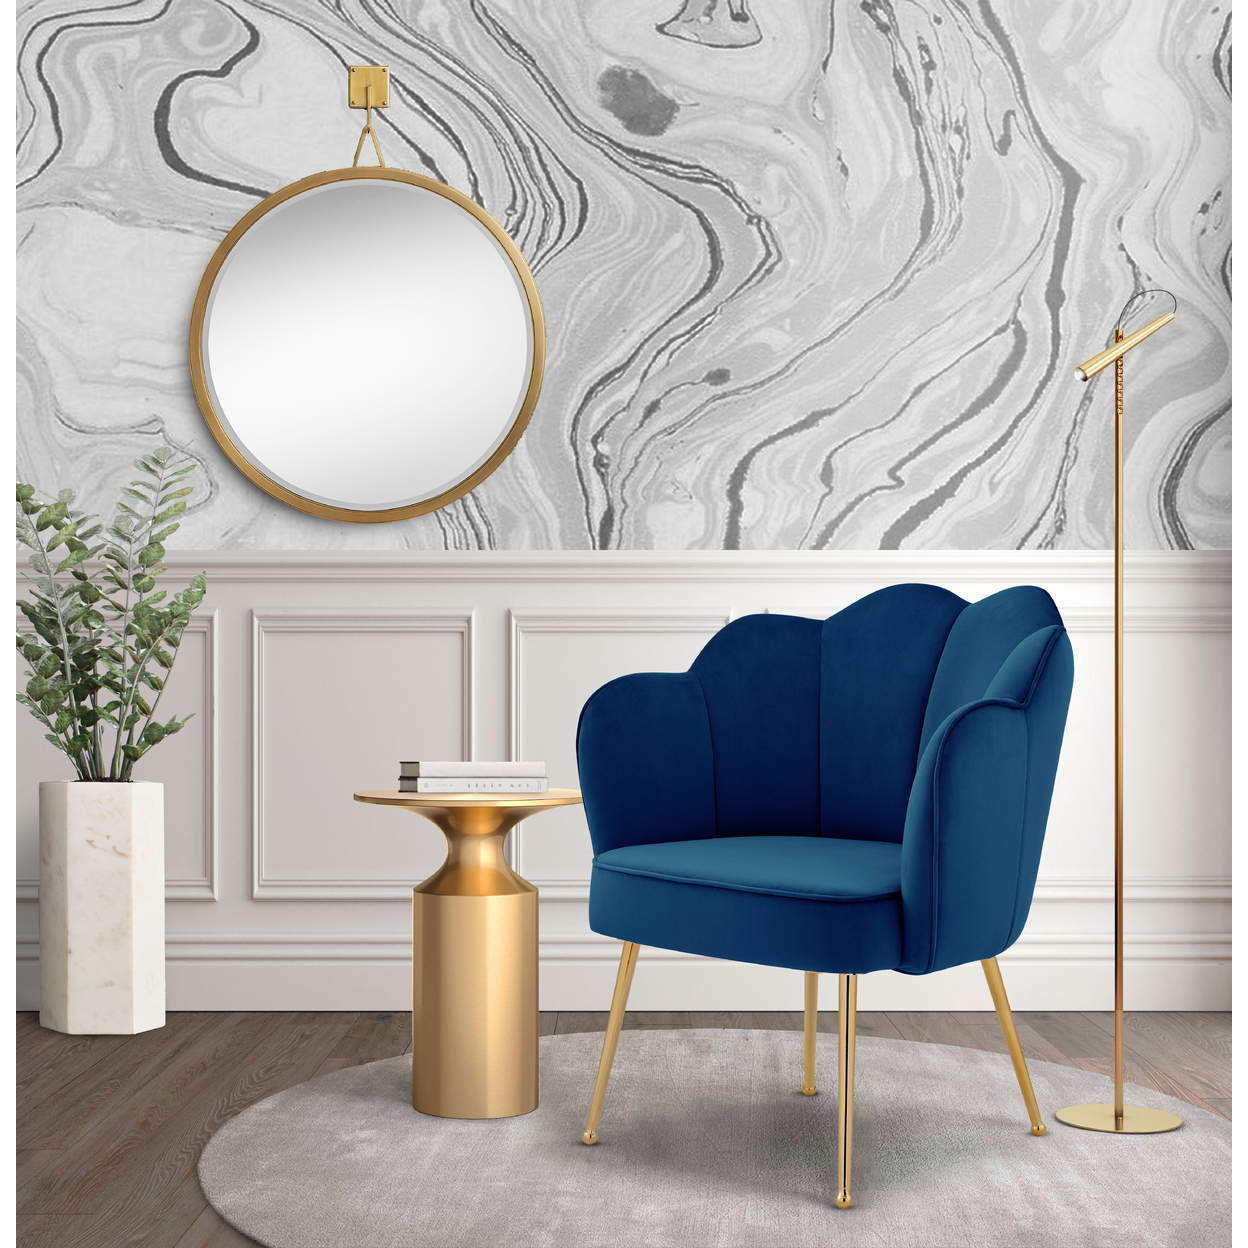 Iconic Home Mia Belle Dining Side Chair Velvet Upholstery Scalloped Clamshell Back Gold Plated Solid Metal Legs (1 Piece) - Navy